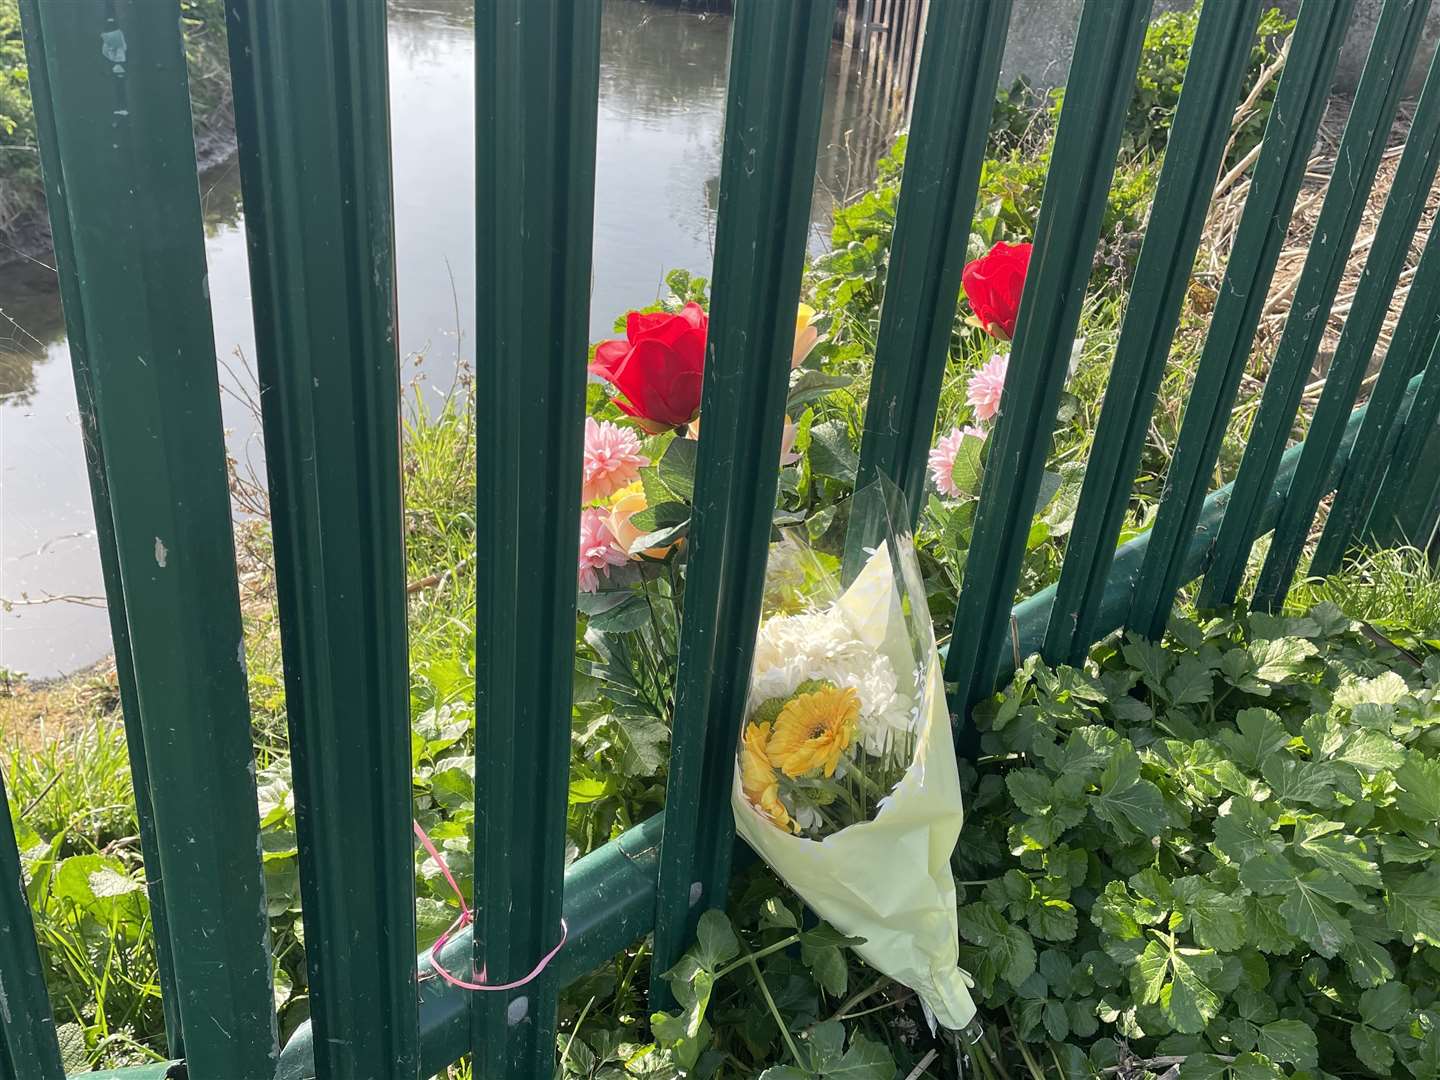 Rachel Holland has laid flowers at the waters edge close to where her son Alex was found